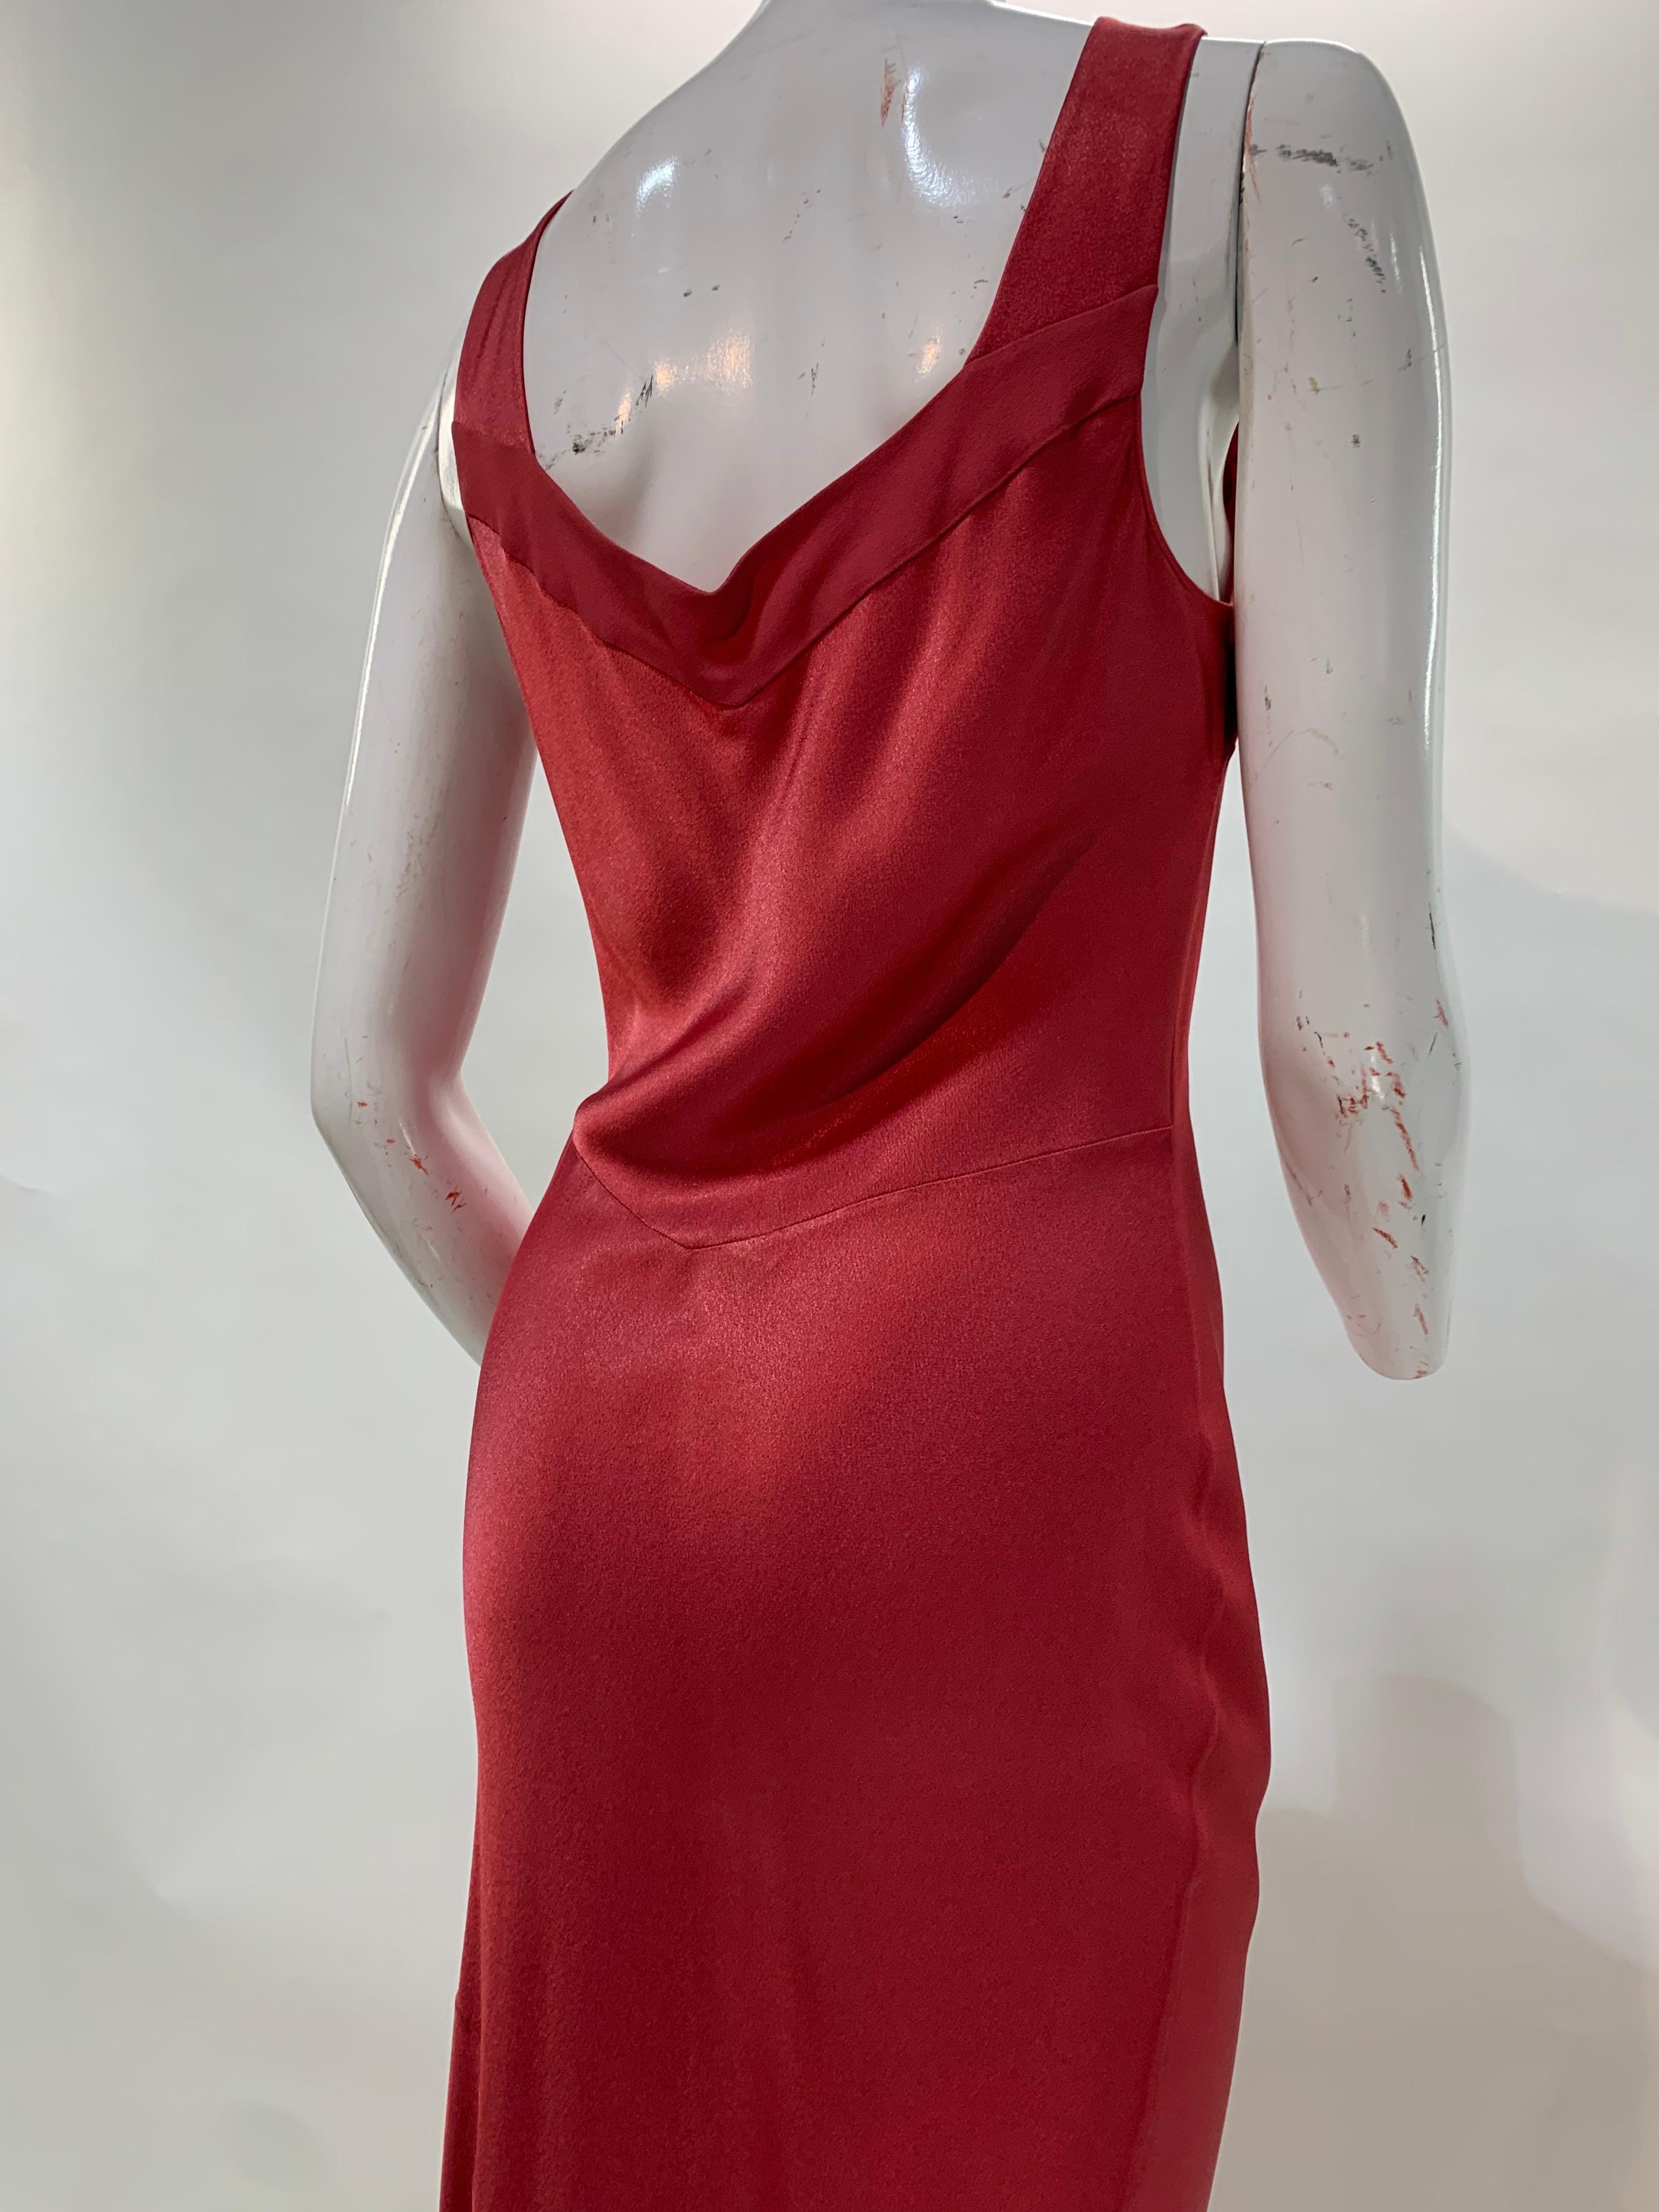 2000 John Galliano Raspberry Red Bias Cut Satin Gown w/ Flared Train & Side Slit In Excellent Condition In Gresham, OR